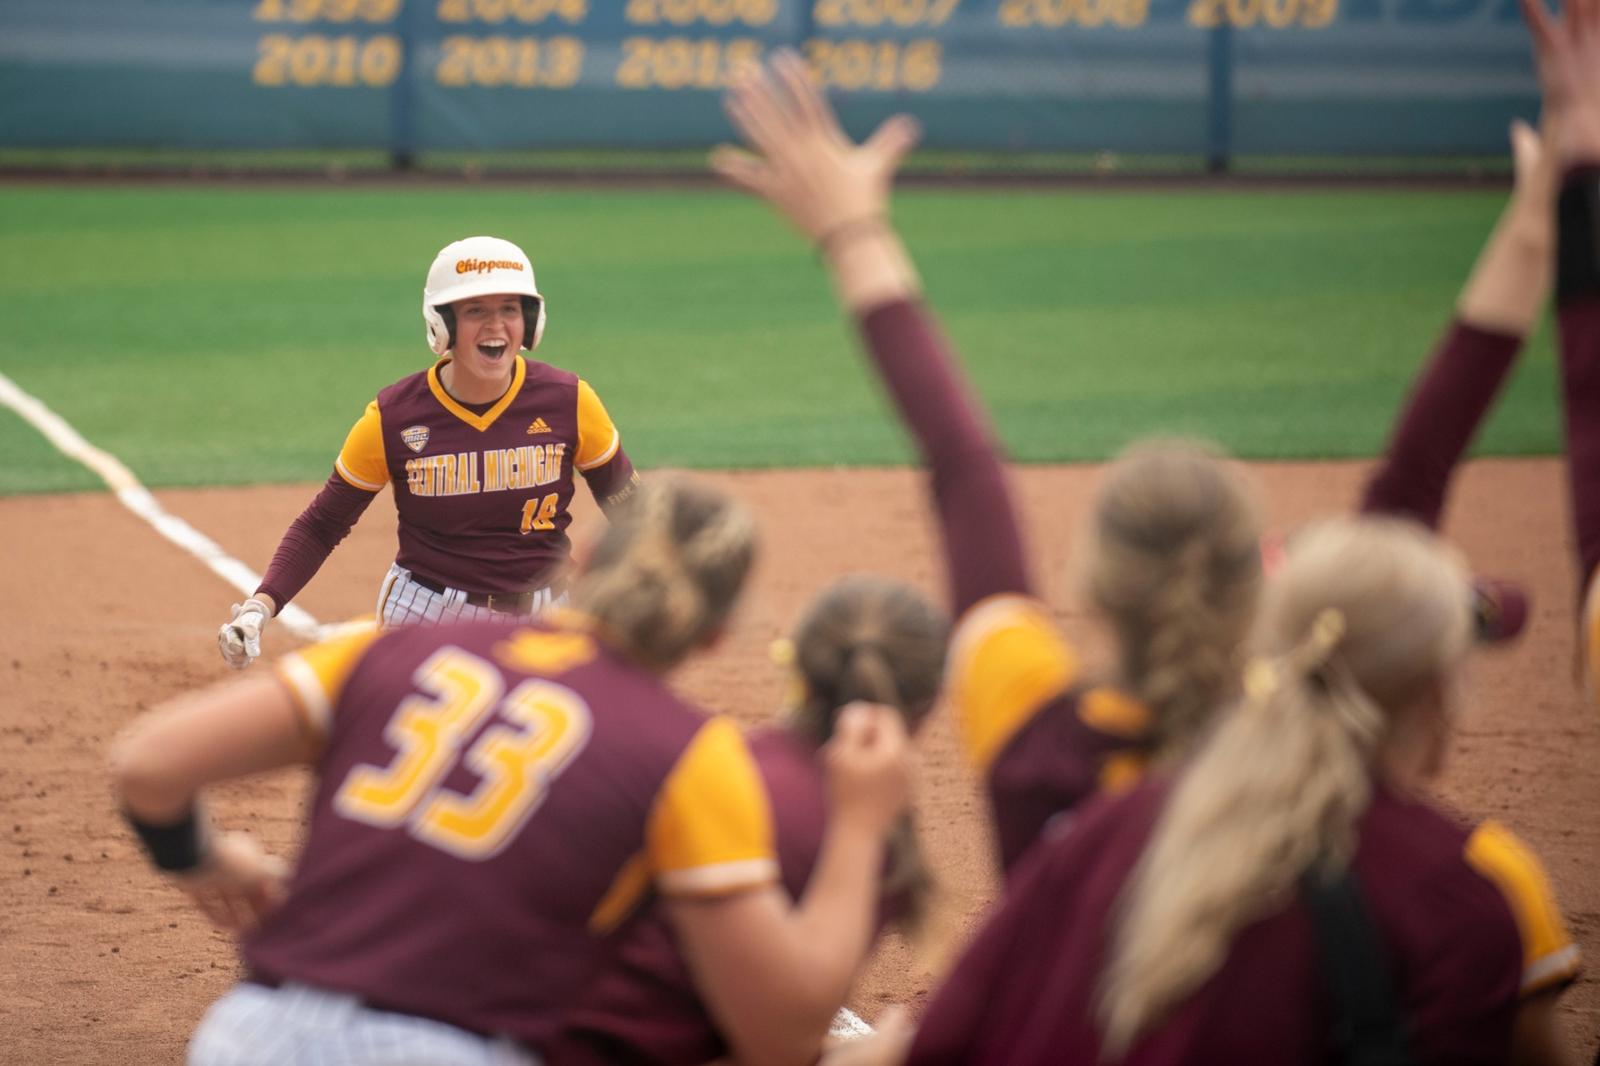 Coberley and Hollo Homer Twice as Softball Earns Split at Kent State